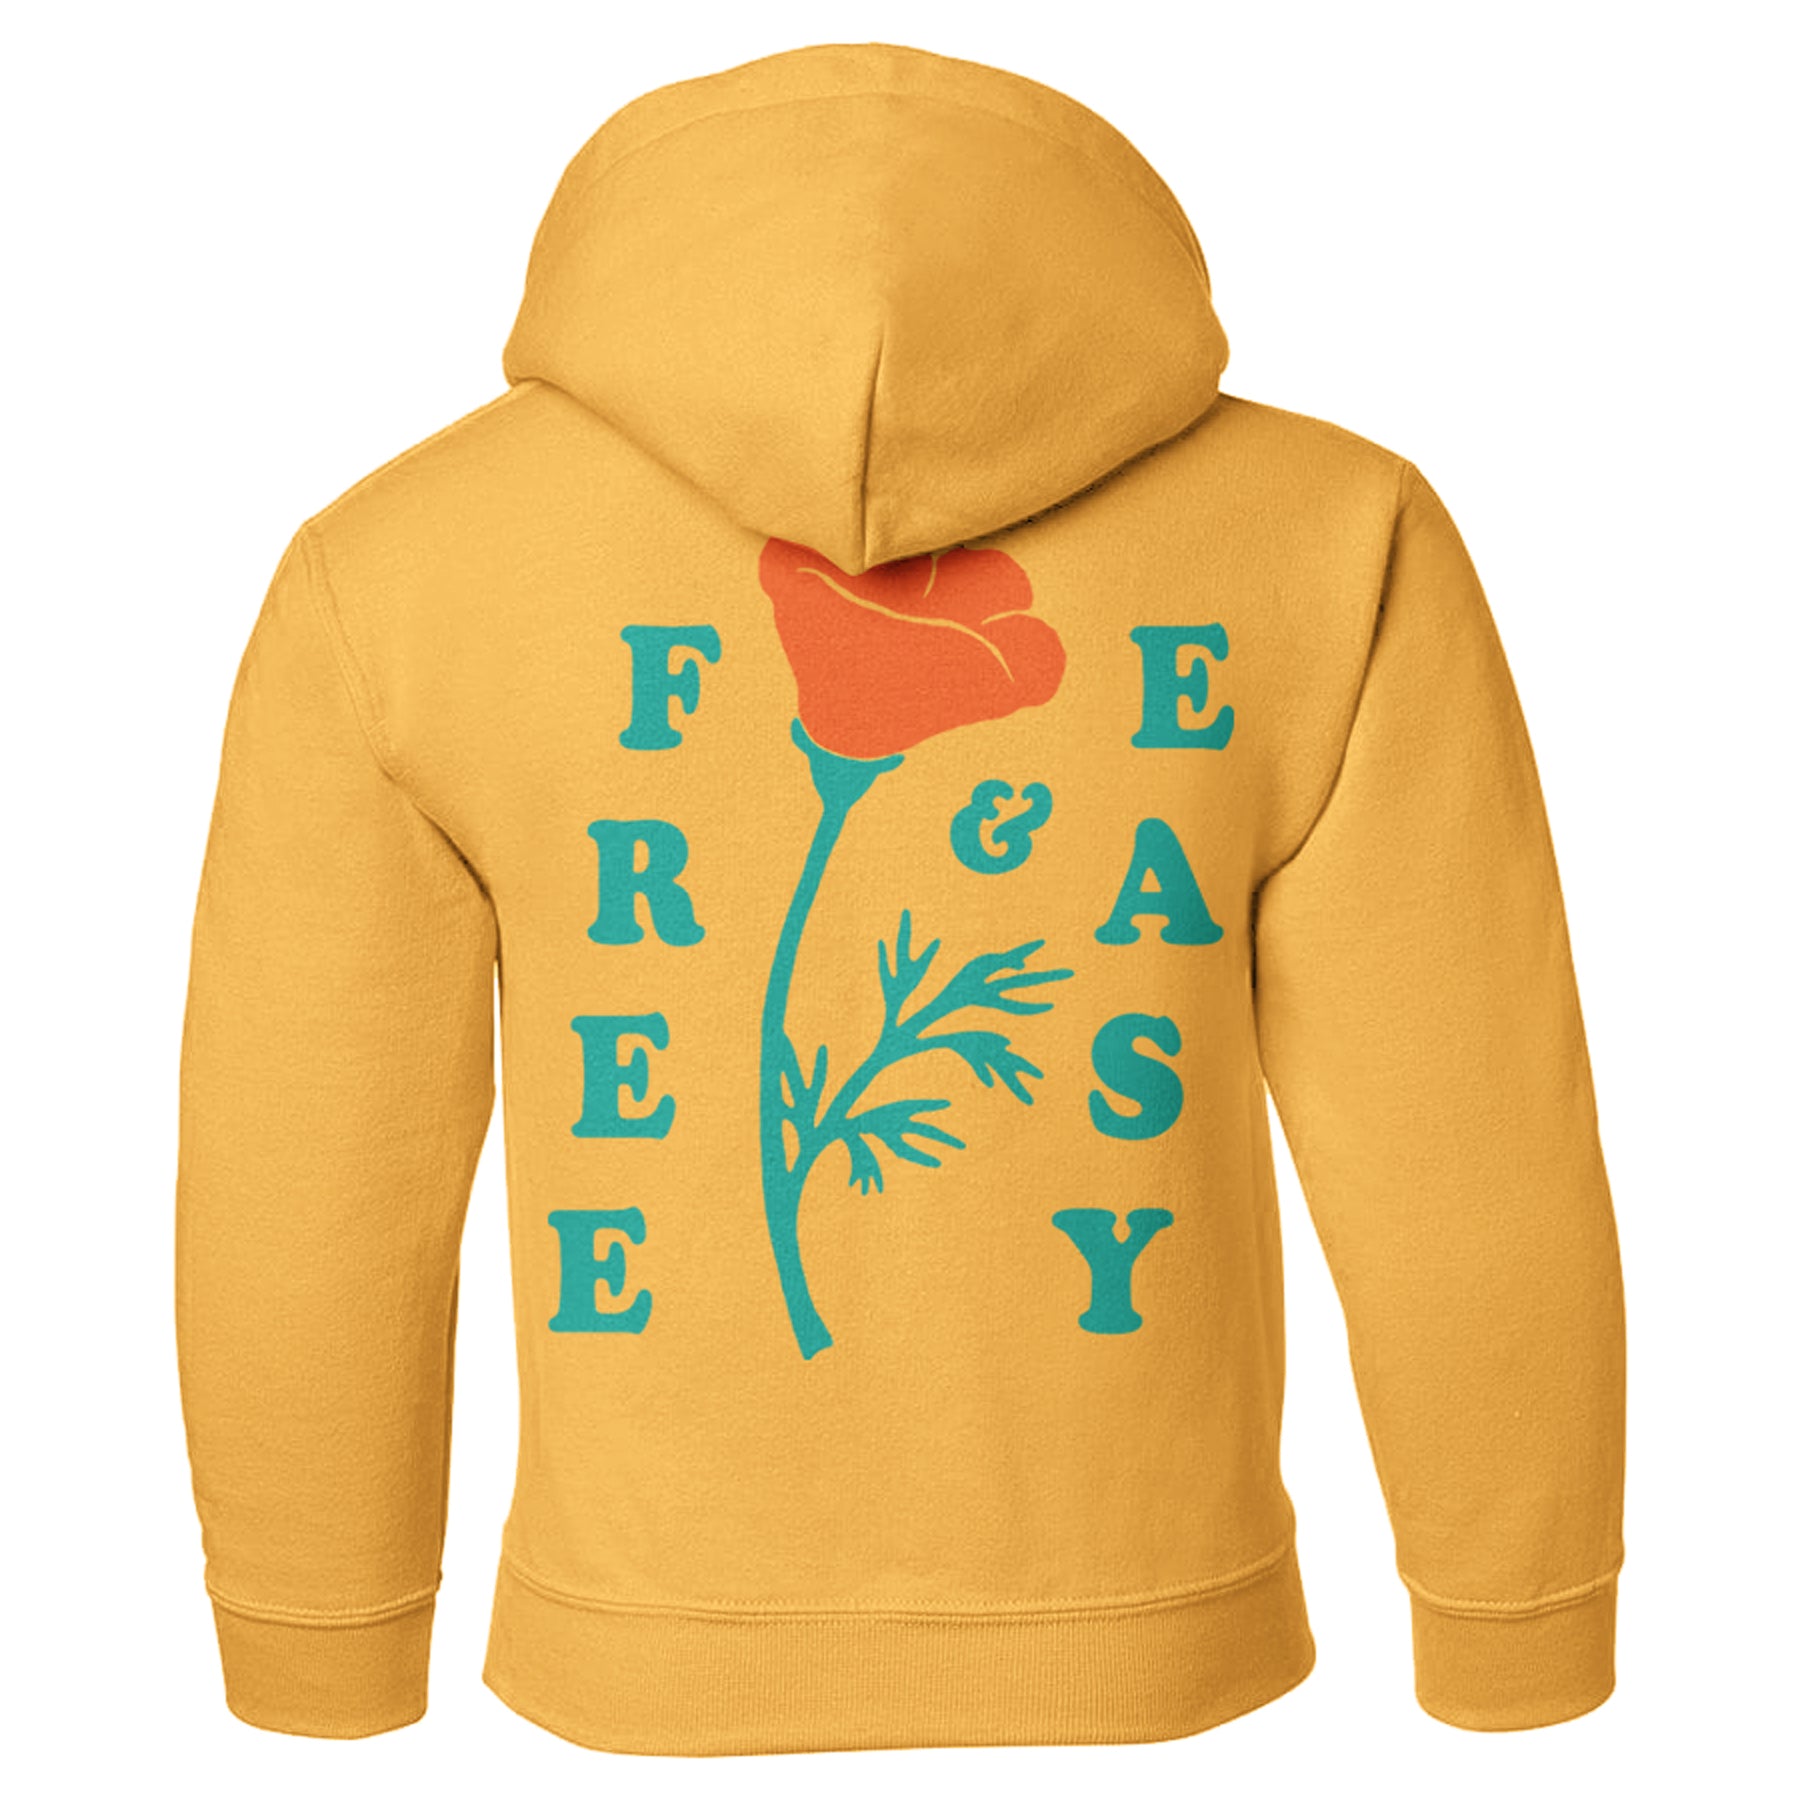 Poppy Kids Hoodie in yellow with teal and orange Free & Easy poppy design on back on a white background - Free & Easy